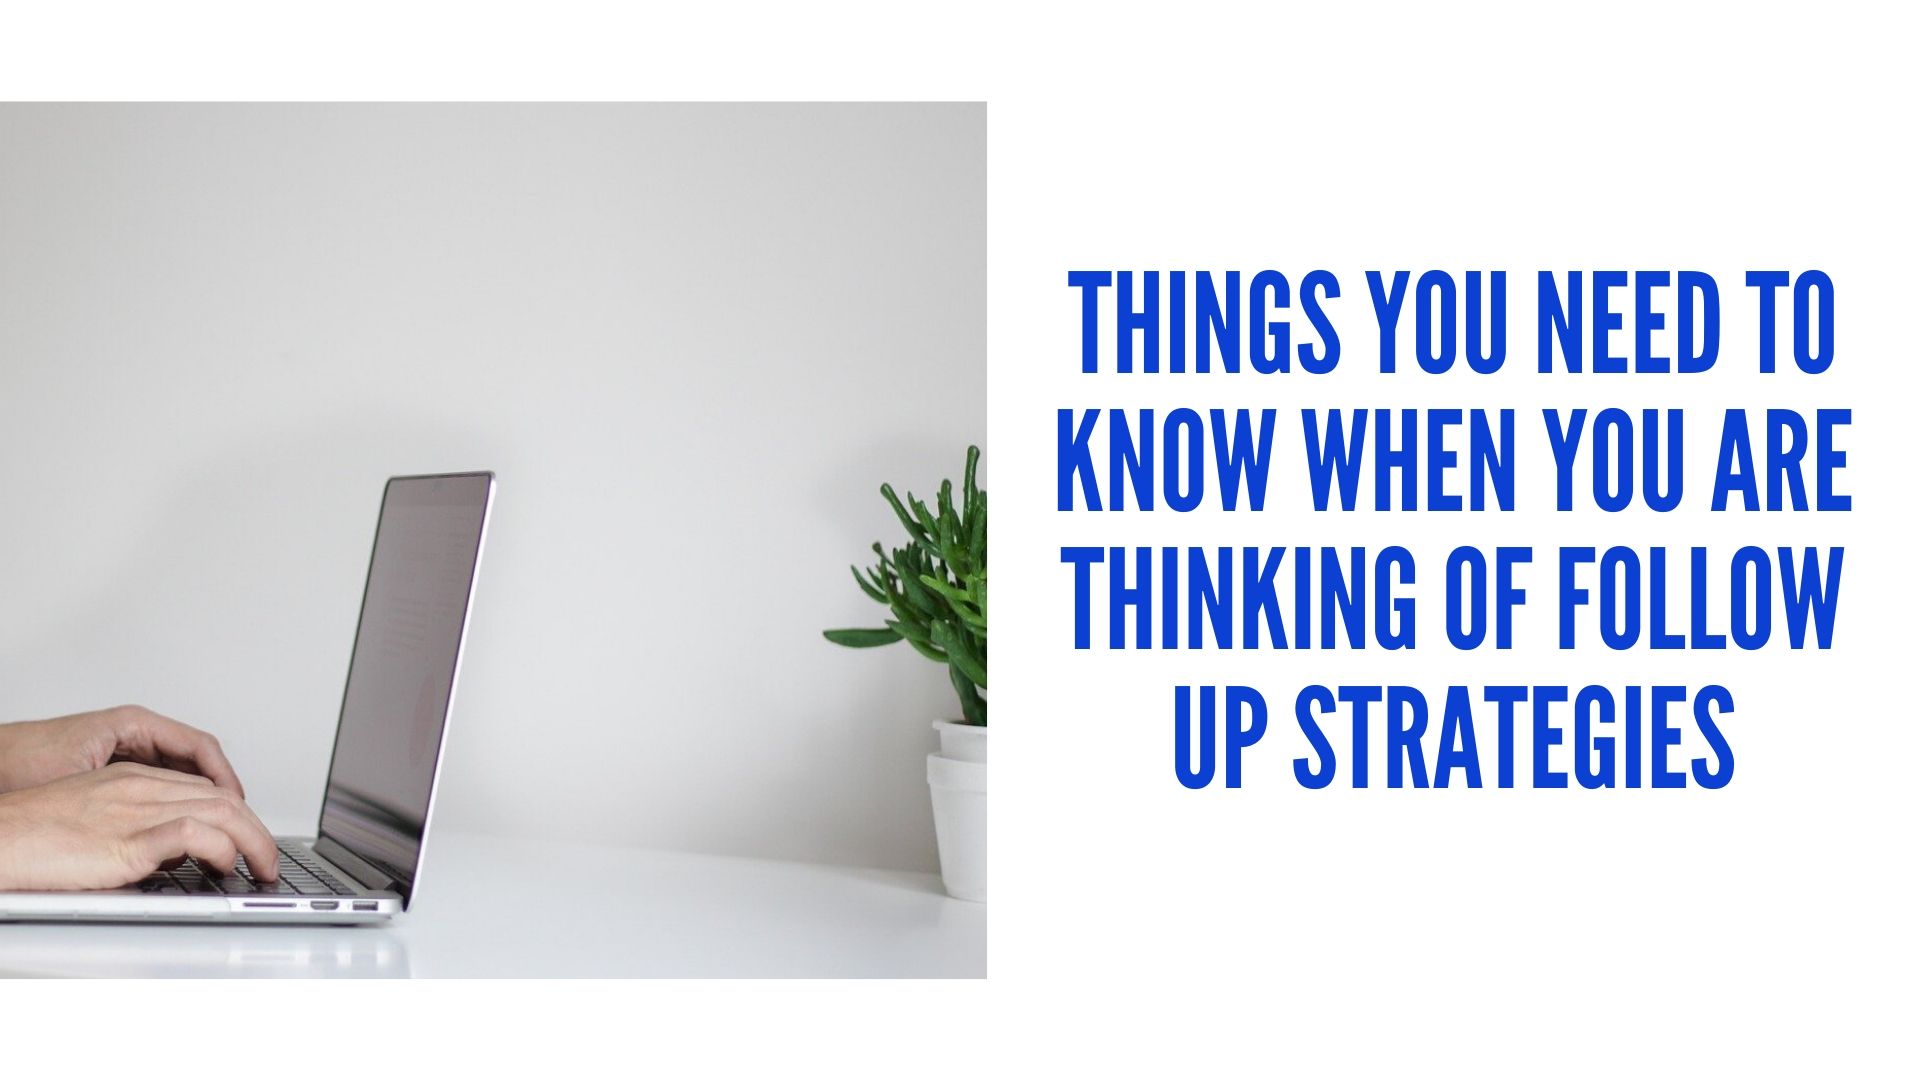 Things You Need To Know When You Are Thinking Of Follow Up Strategies